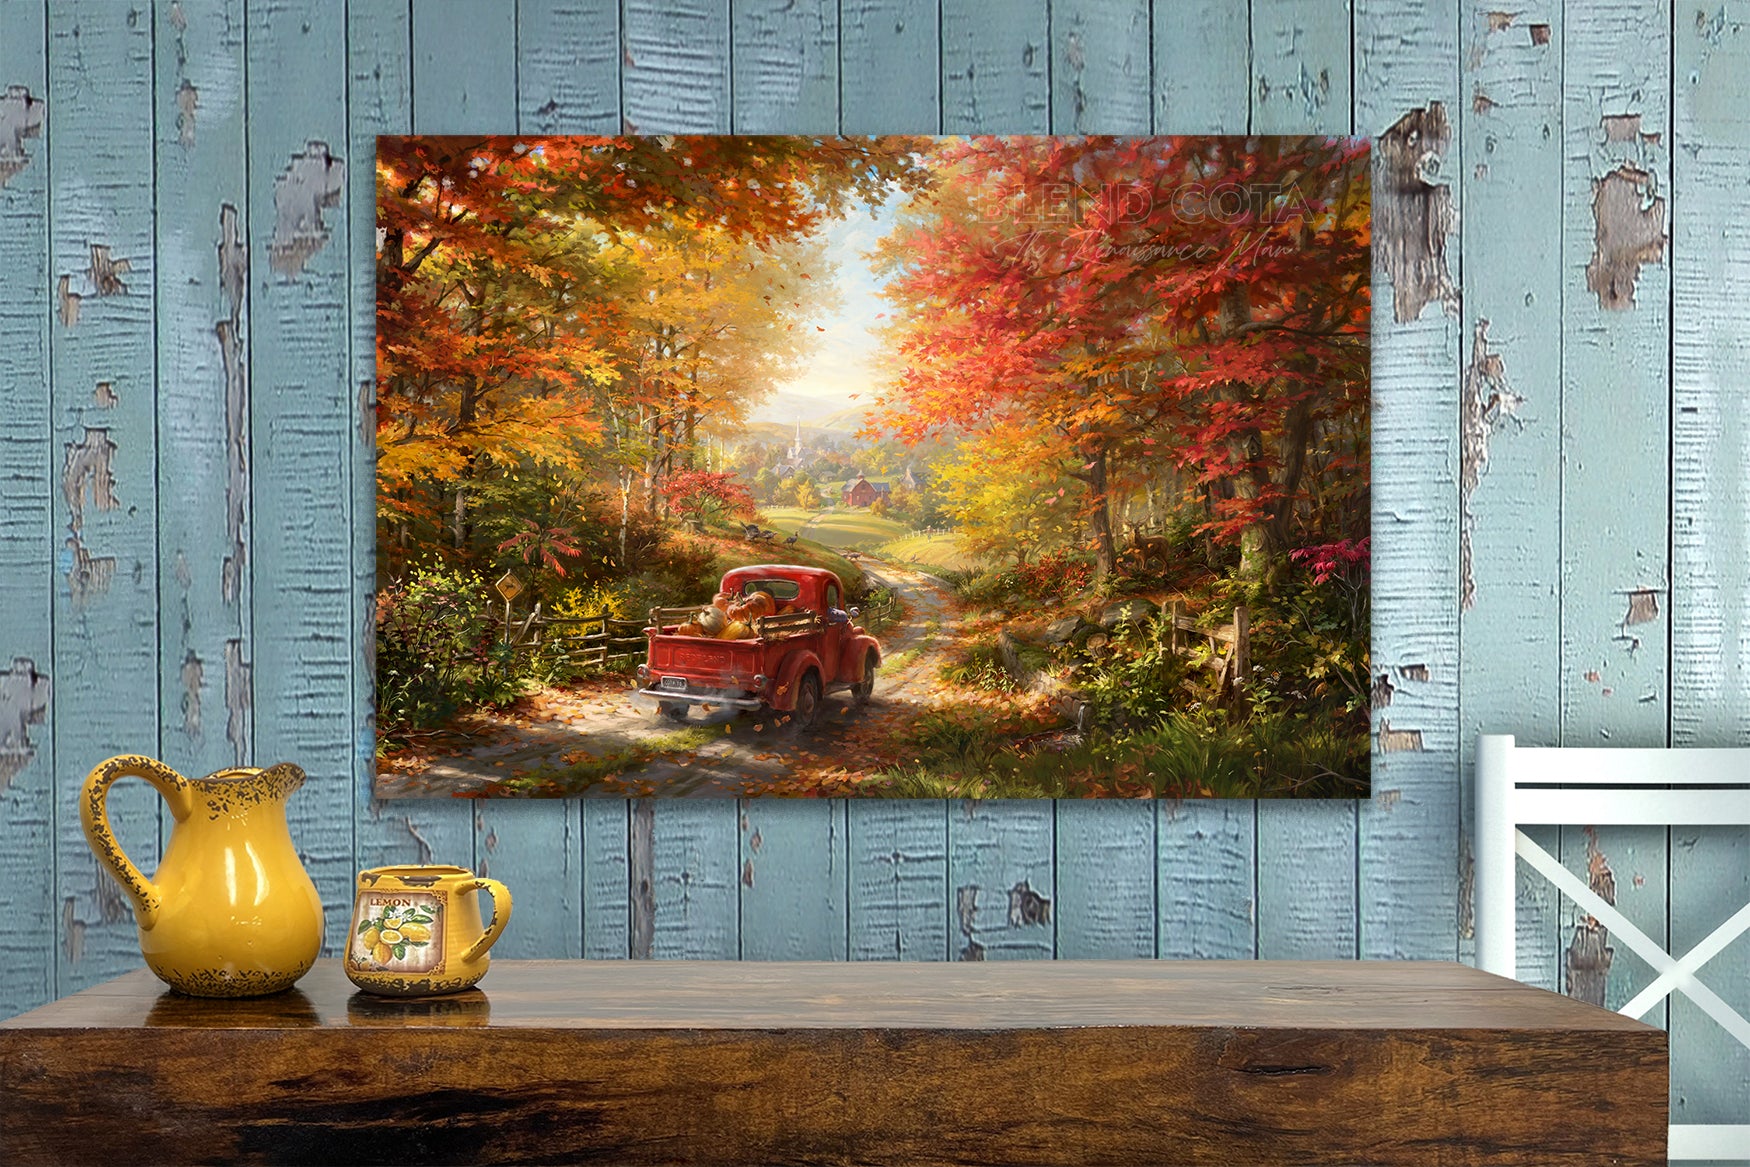 The Place I Belong | Fall Road Autumn Leaves - Blend Cota Original Oil Painting Framed on Canvas - Blend Cota Studios - unframed painting hanging on blue wooden panel wall